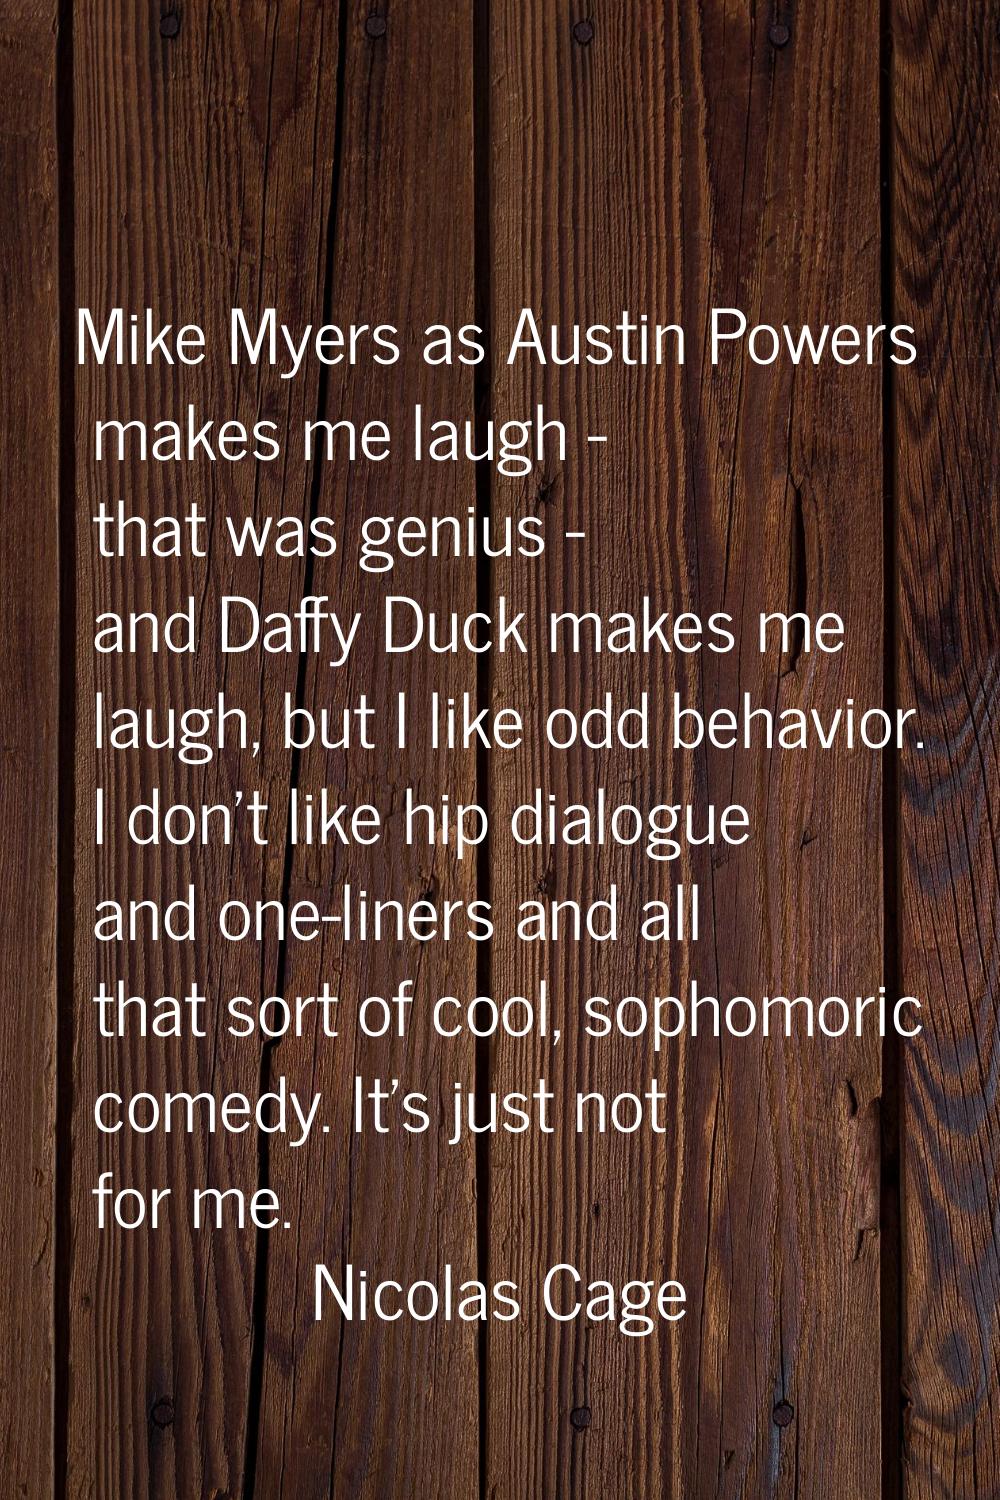 Mike Myers as Austin Powers makes me laugh - that was genius - and Daffy Duck makes me laugh, but I